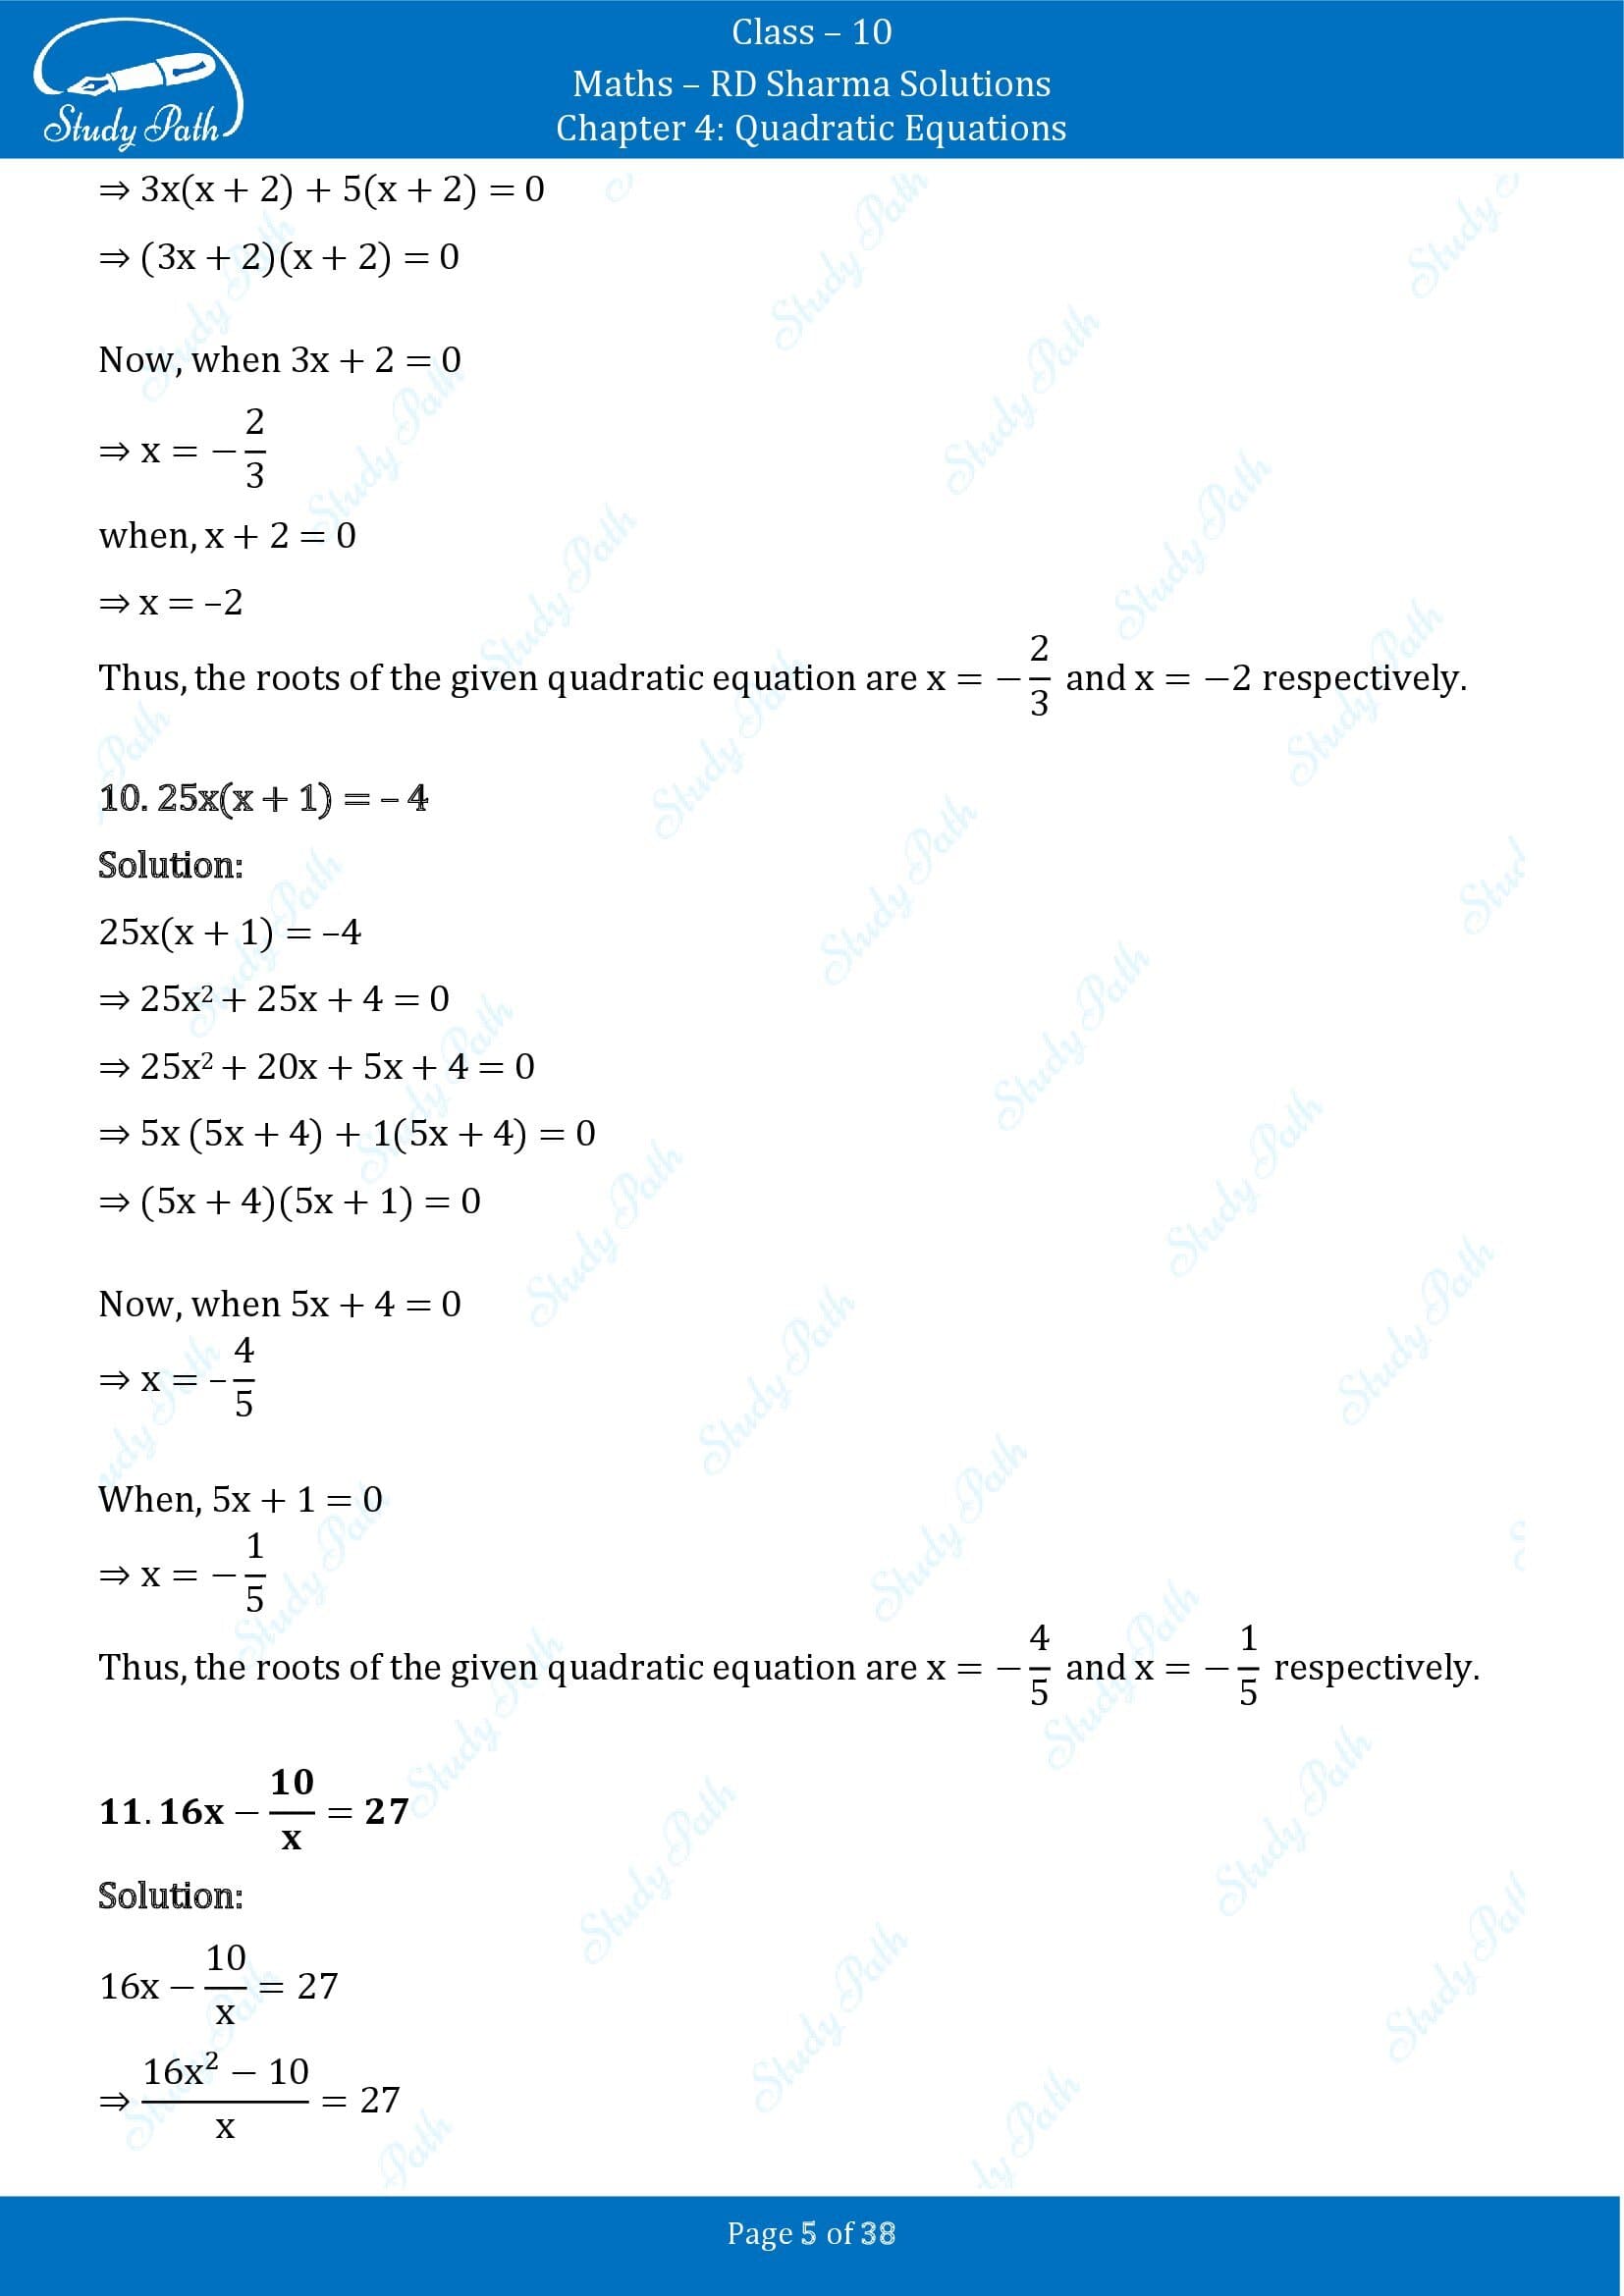 RD Sharma Solutions Class 10 Chapter 4 Quadratic Equations Exercise 4.3 00005